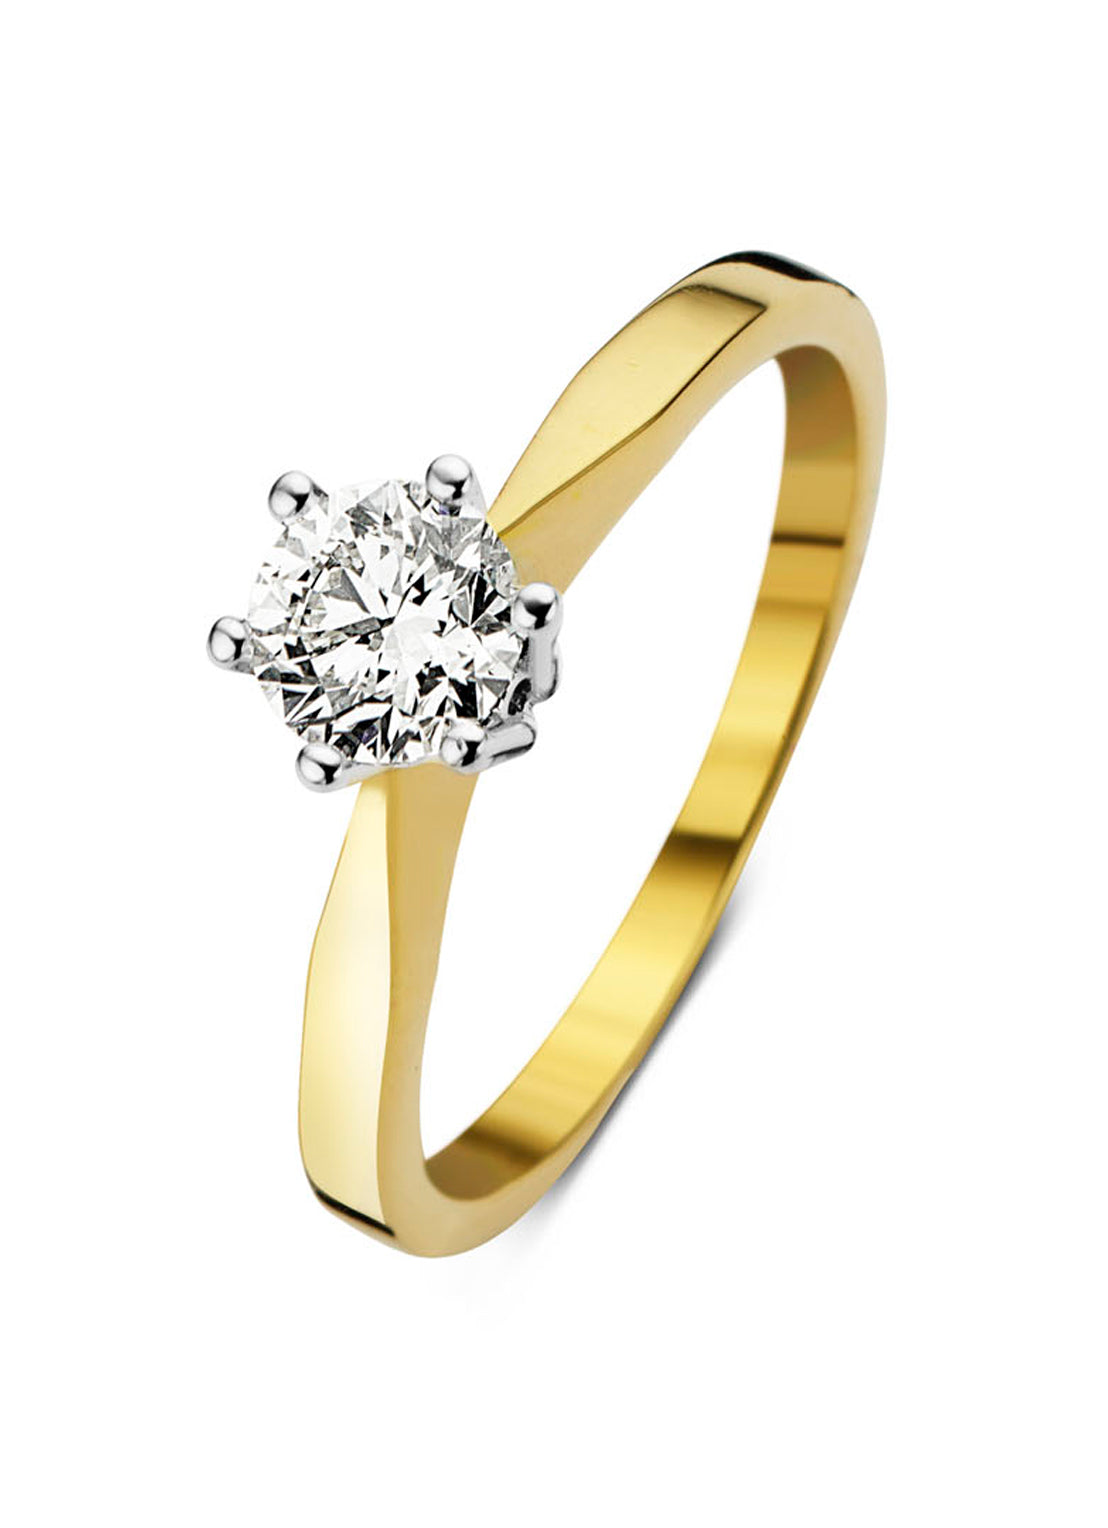 Yellow gold solitaire ring, half carat